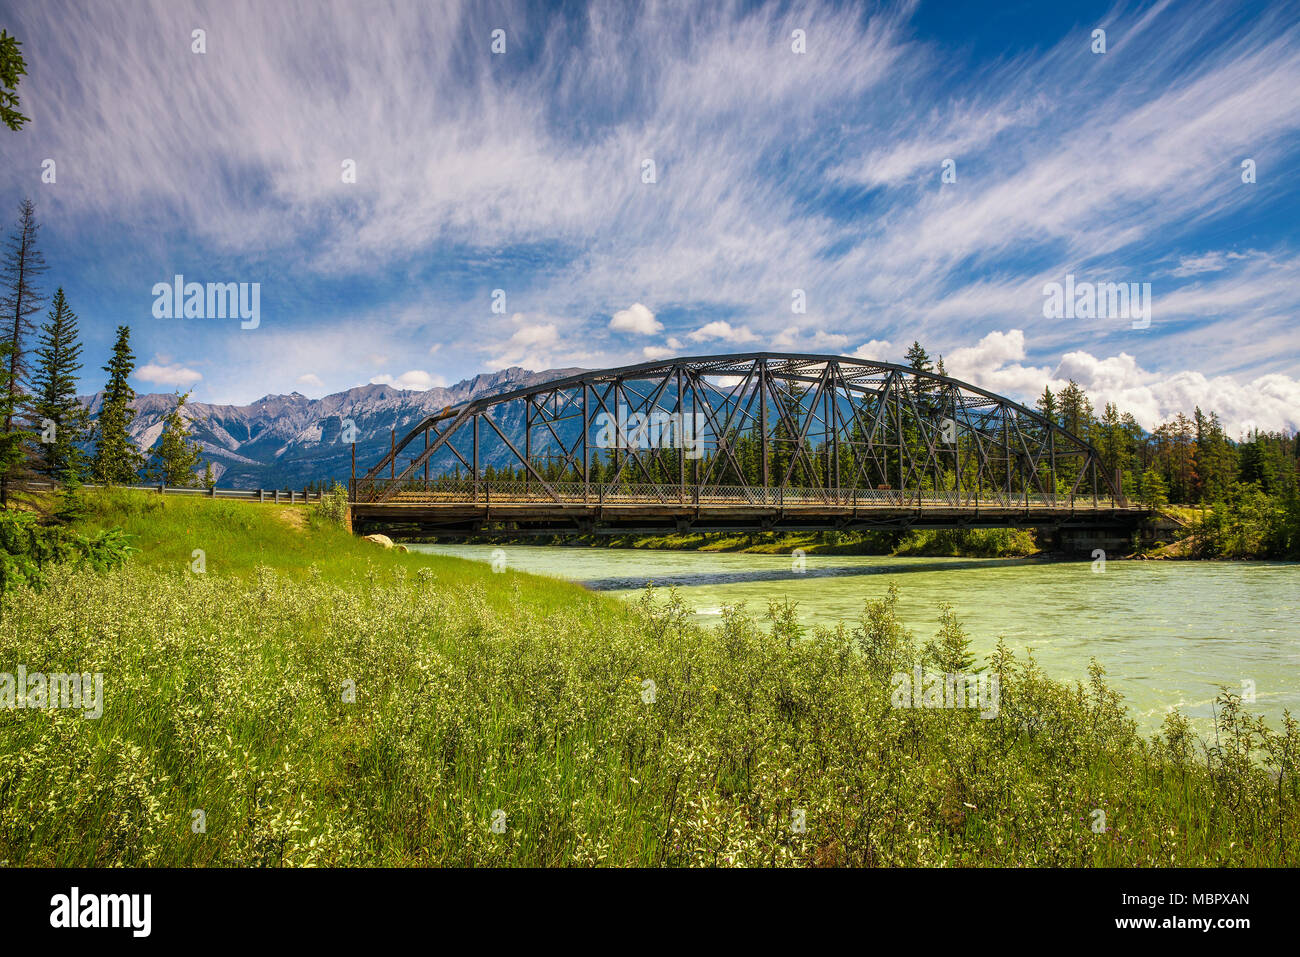 Bridge over the Athabasca River in Jasper National Park, Canada Stock Photo